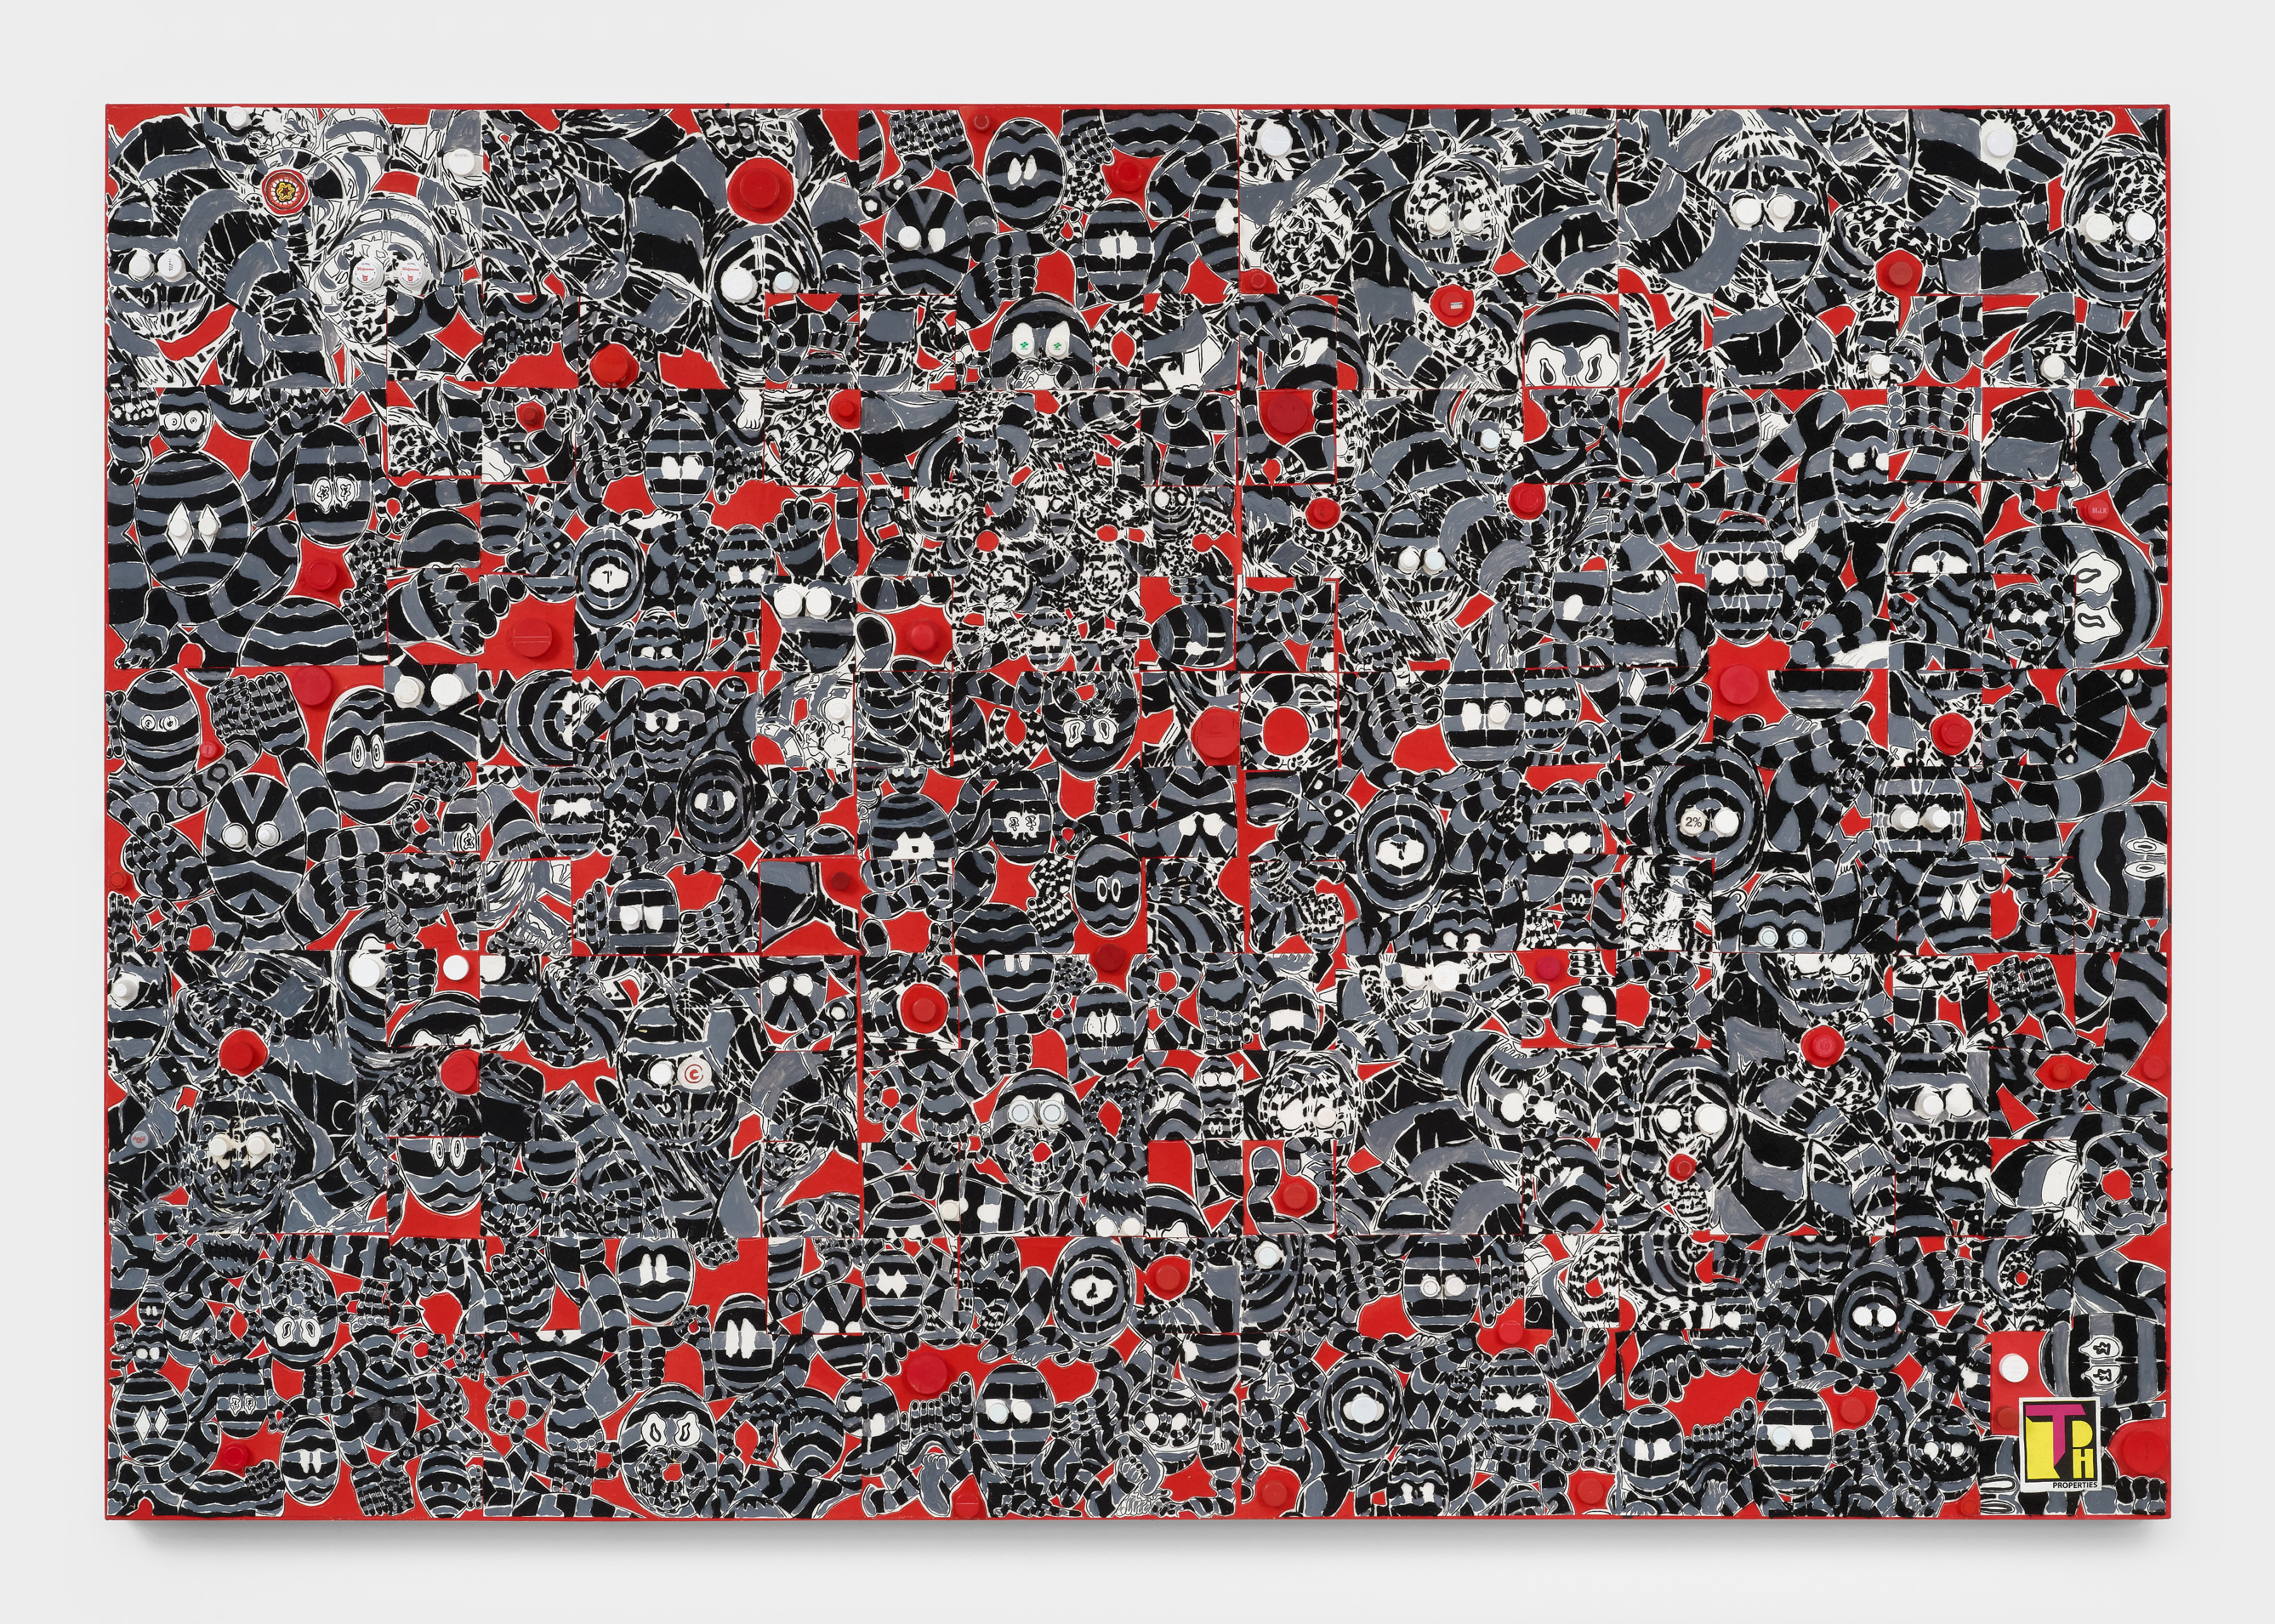 A painting of small striped black and grey faces against a red background with red bottle caps adhered to the canvas.